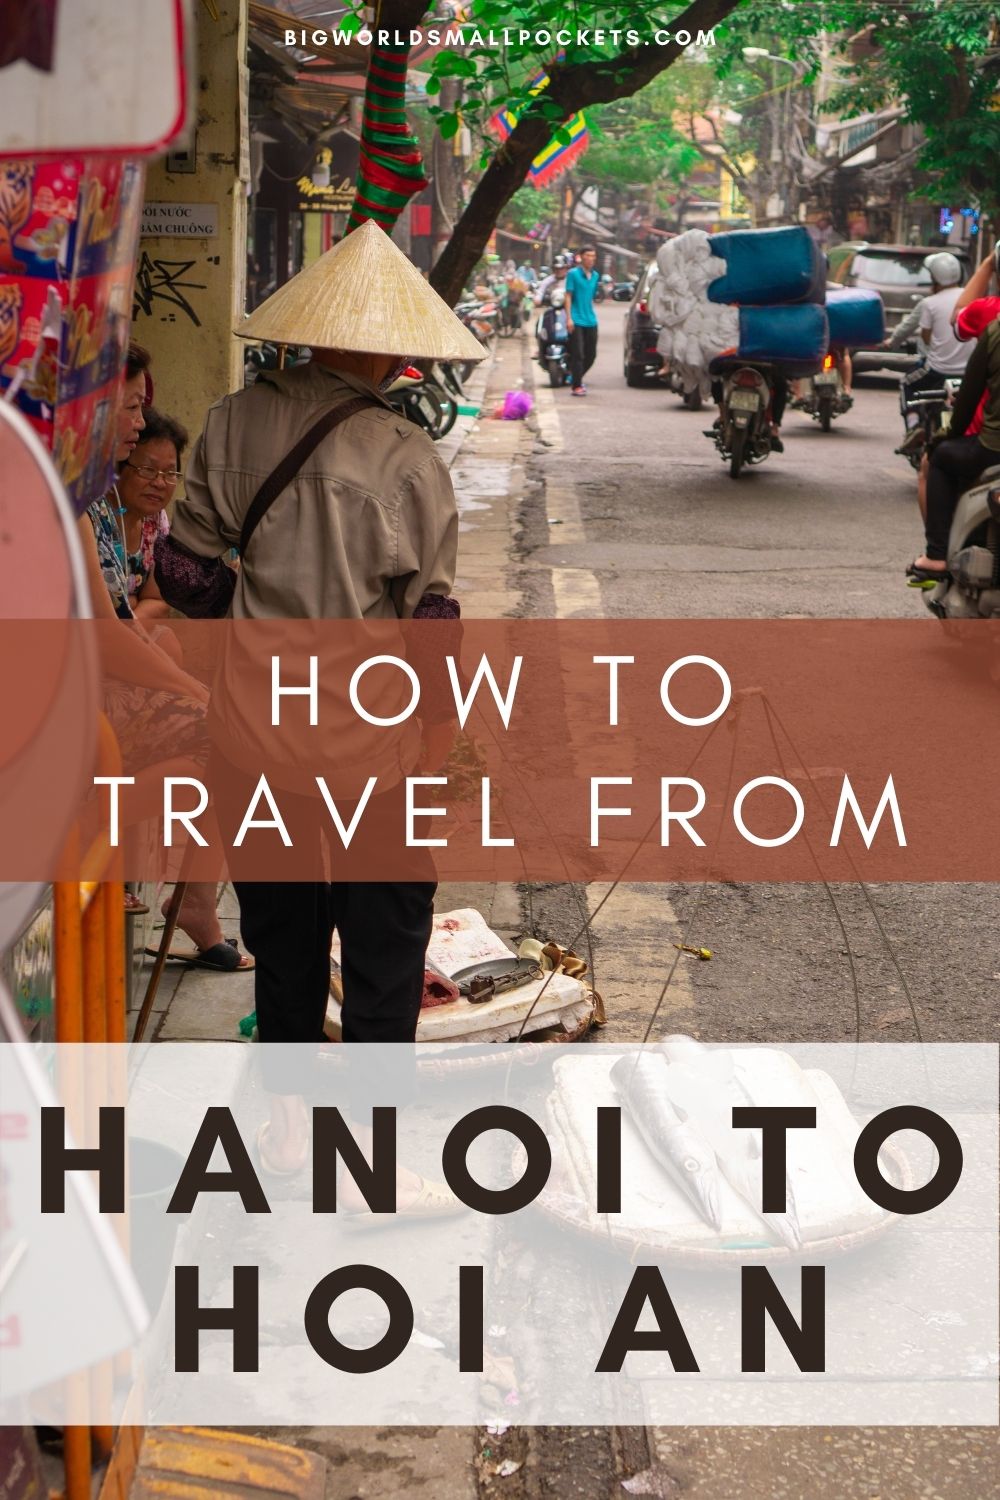 How to Travel from Hanoi to Hoi An in Vietnam